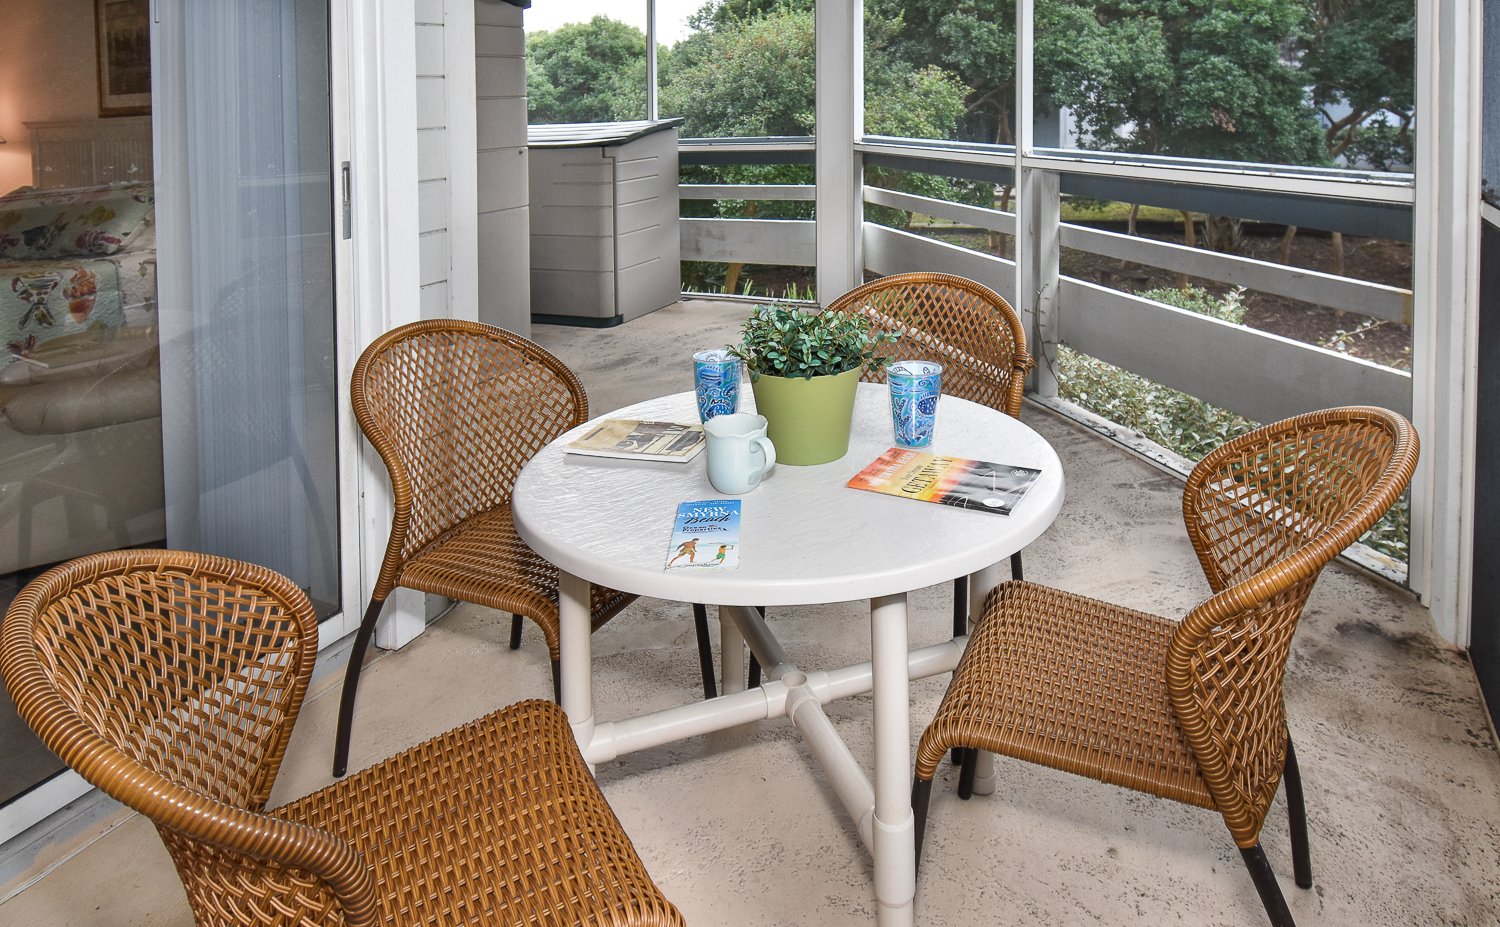 Large screened patio and sun deck outside the New Smyrna Beach vacation home.